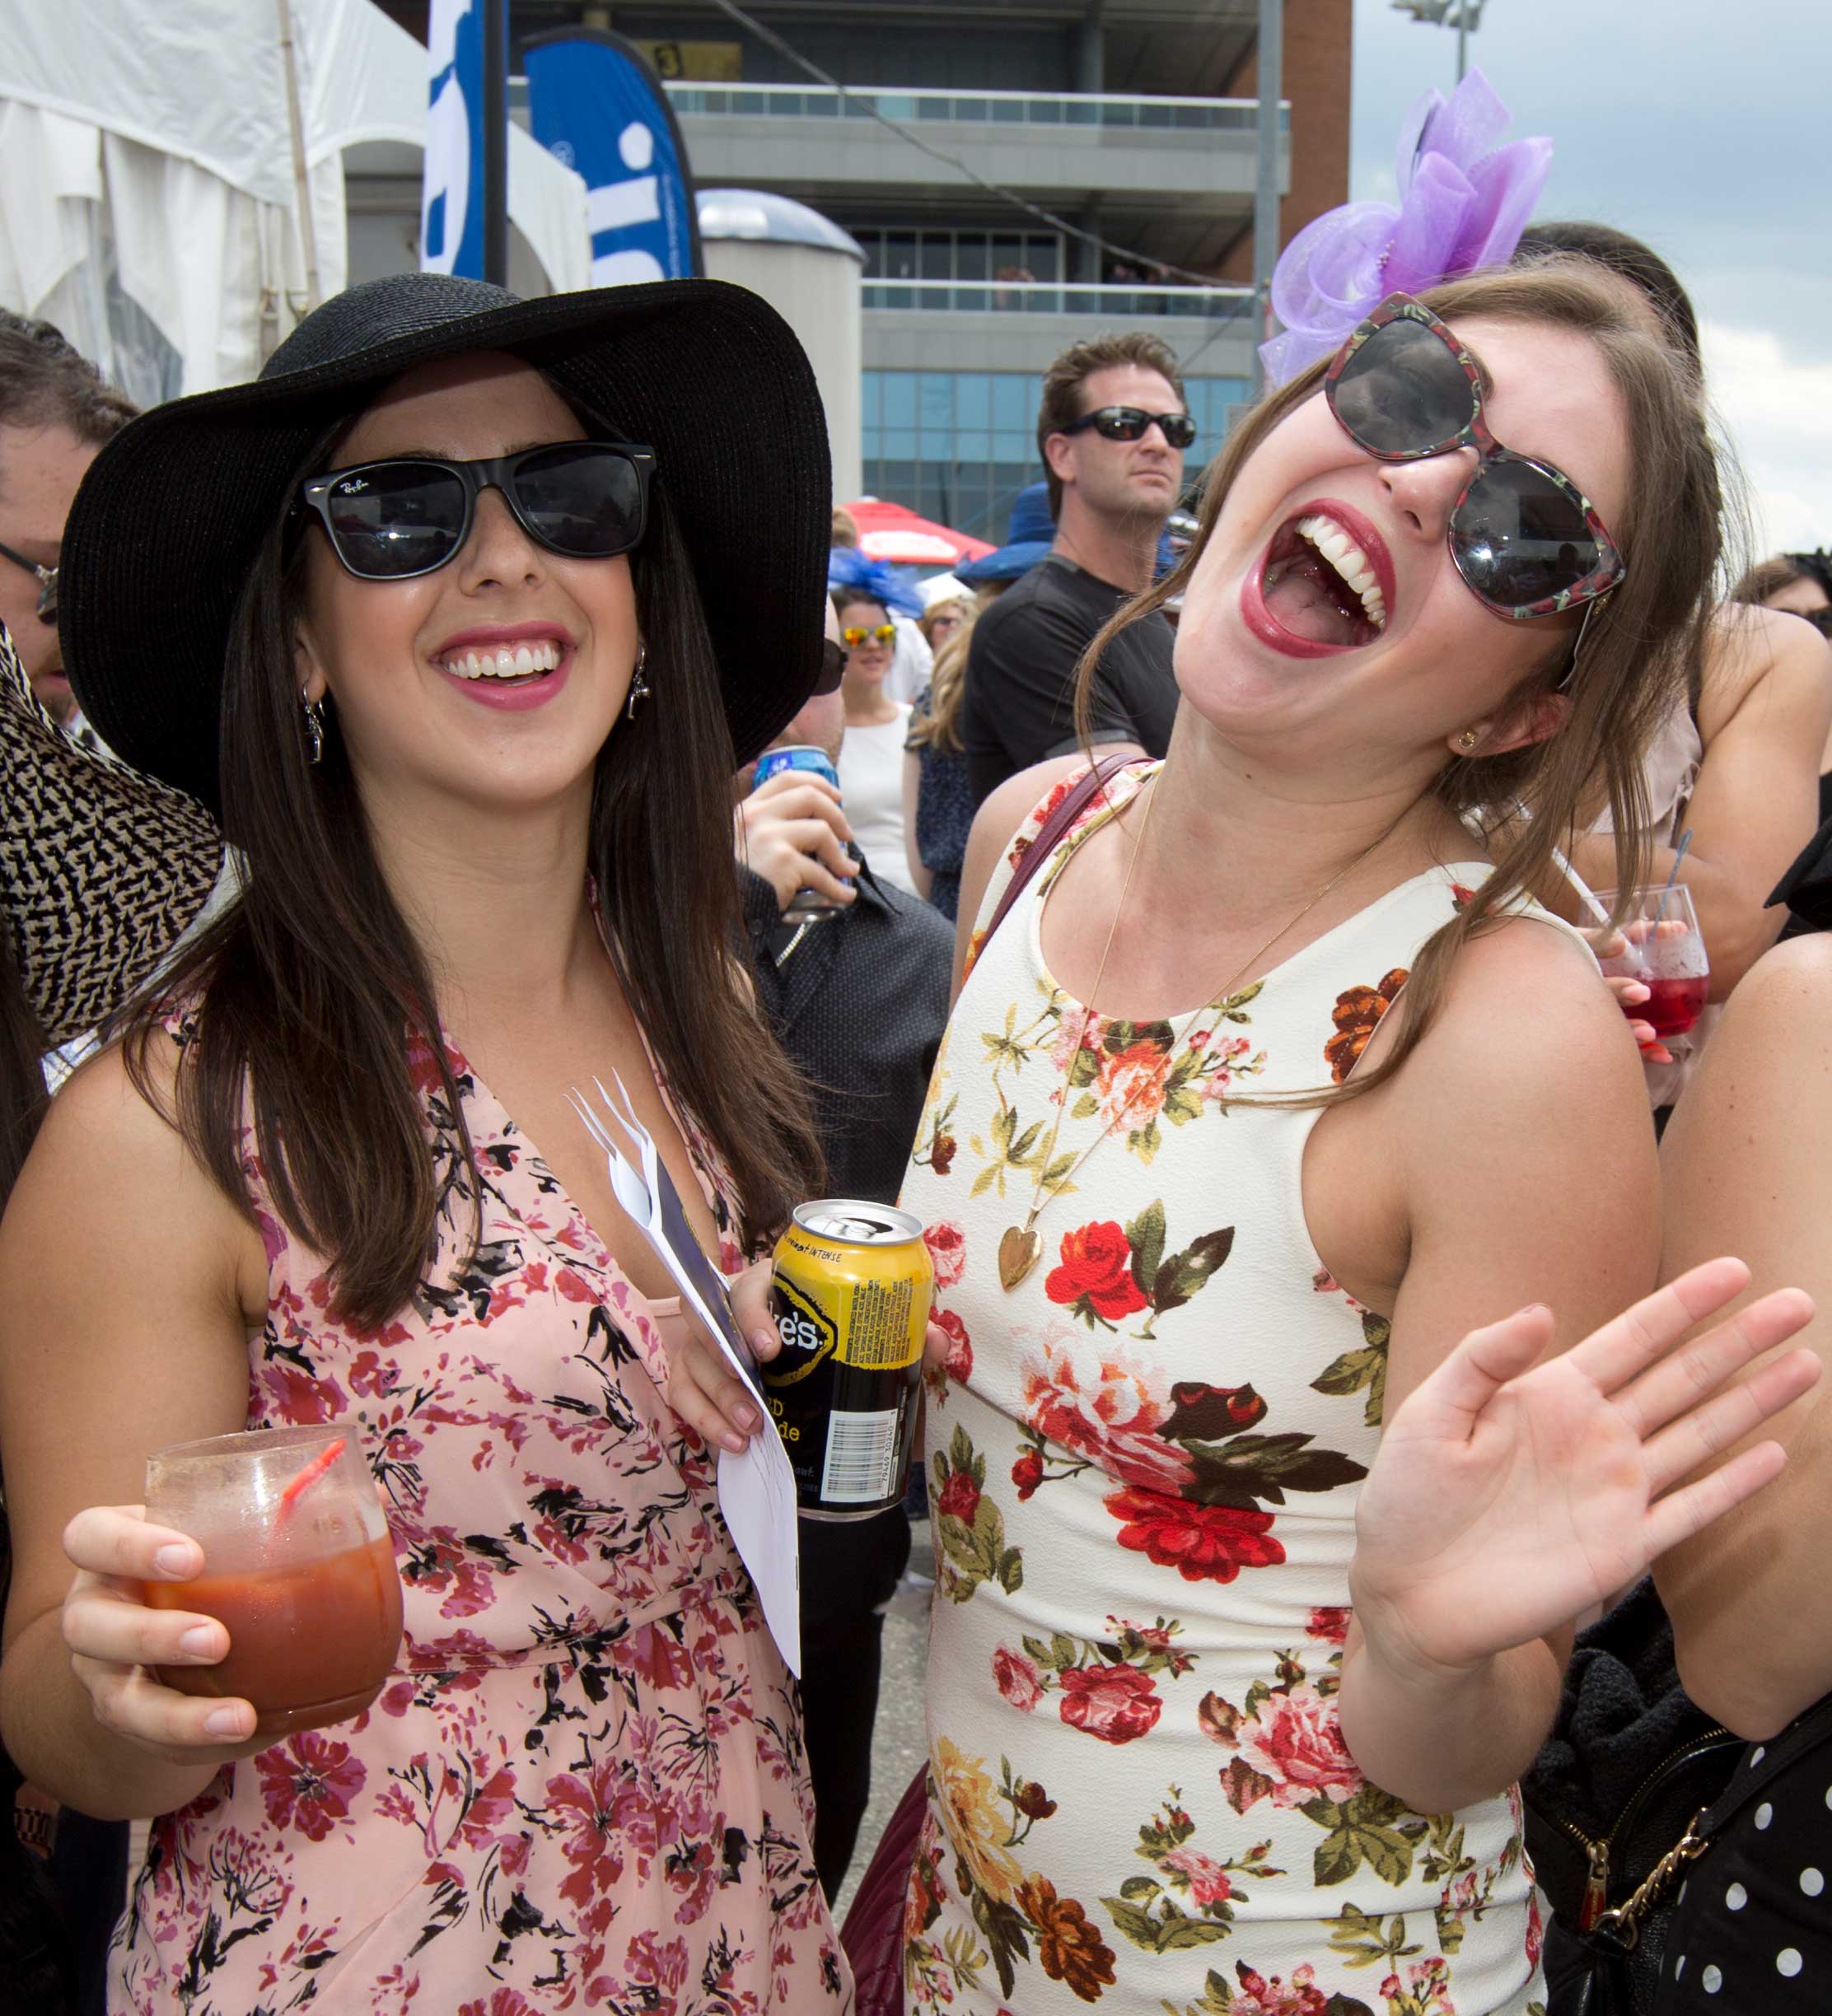 Set your own trends at the King's Plate at Woodbine Racetrack